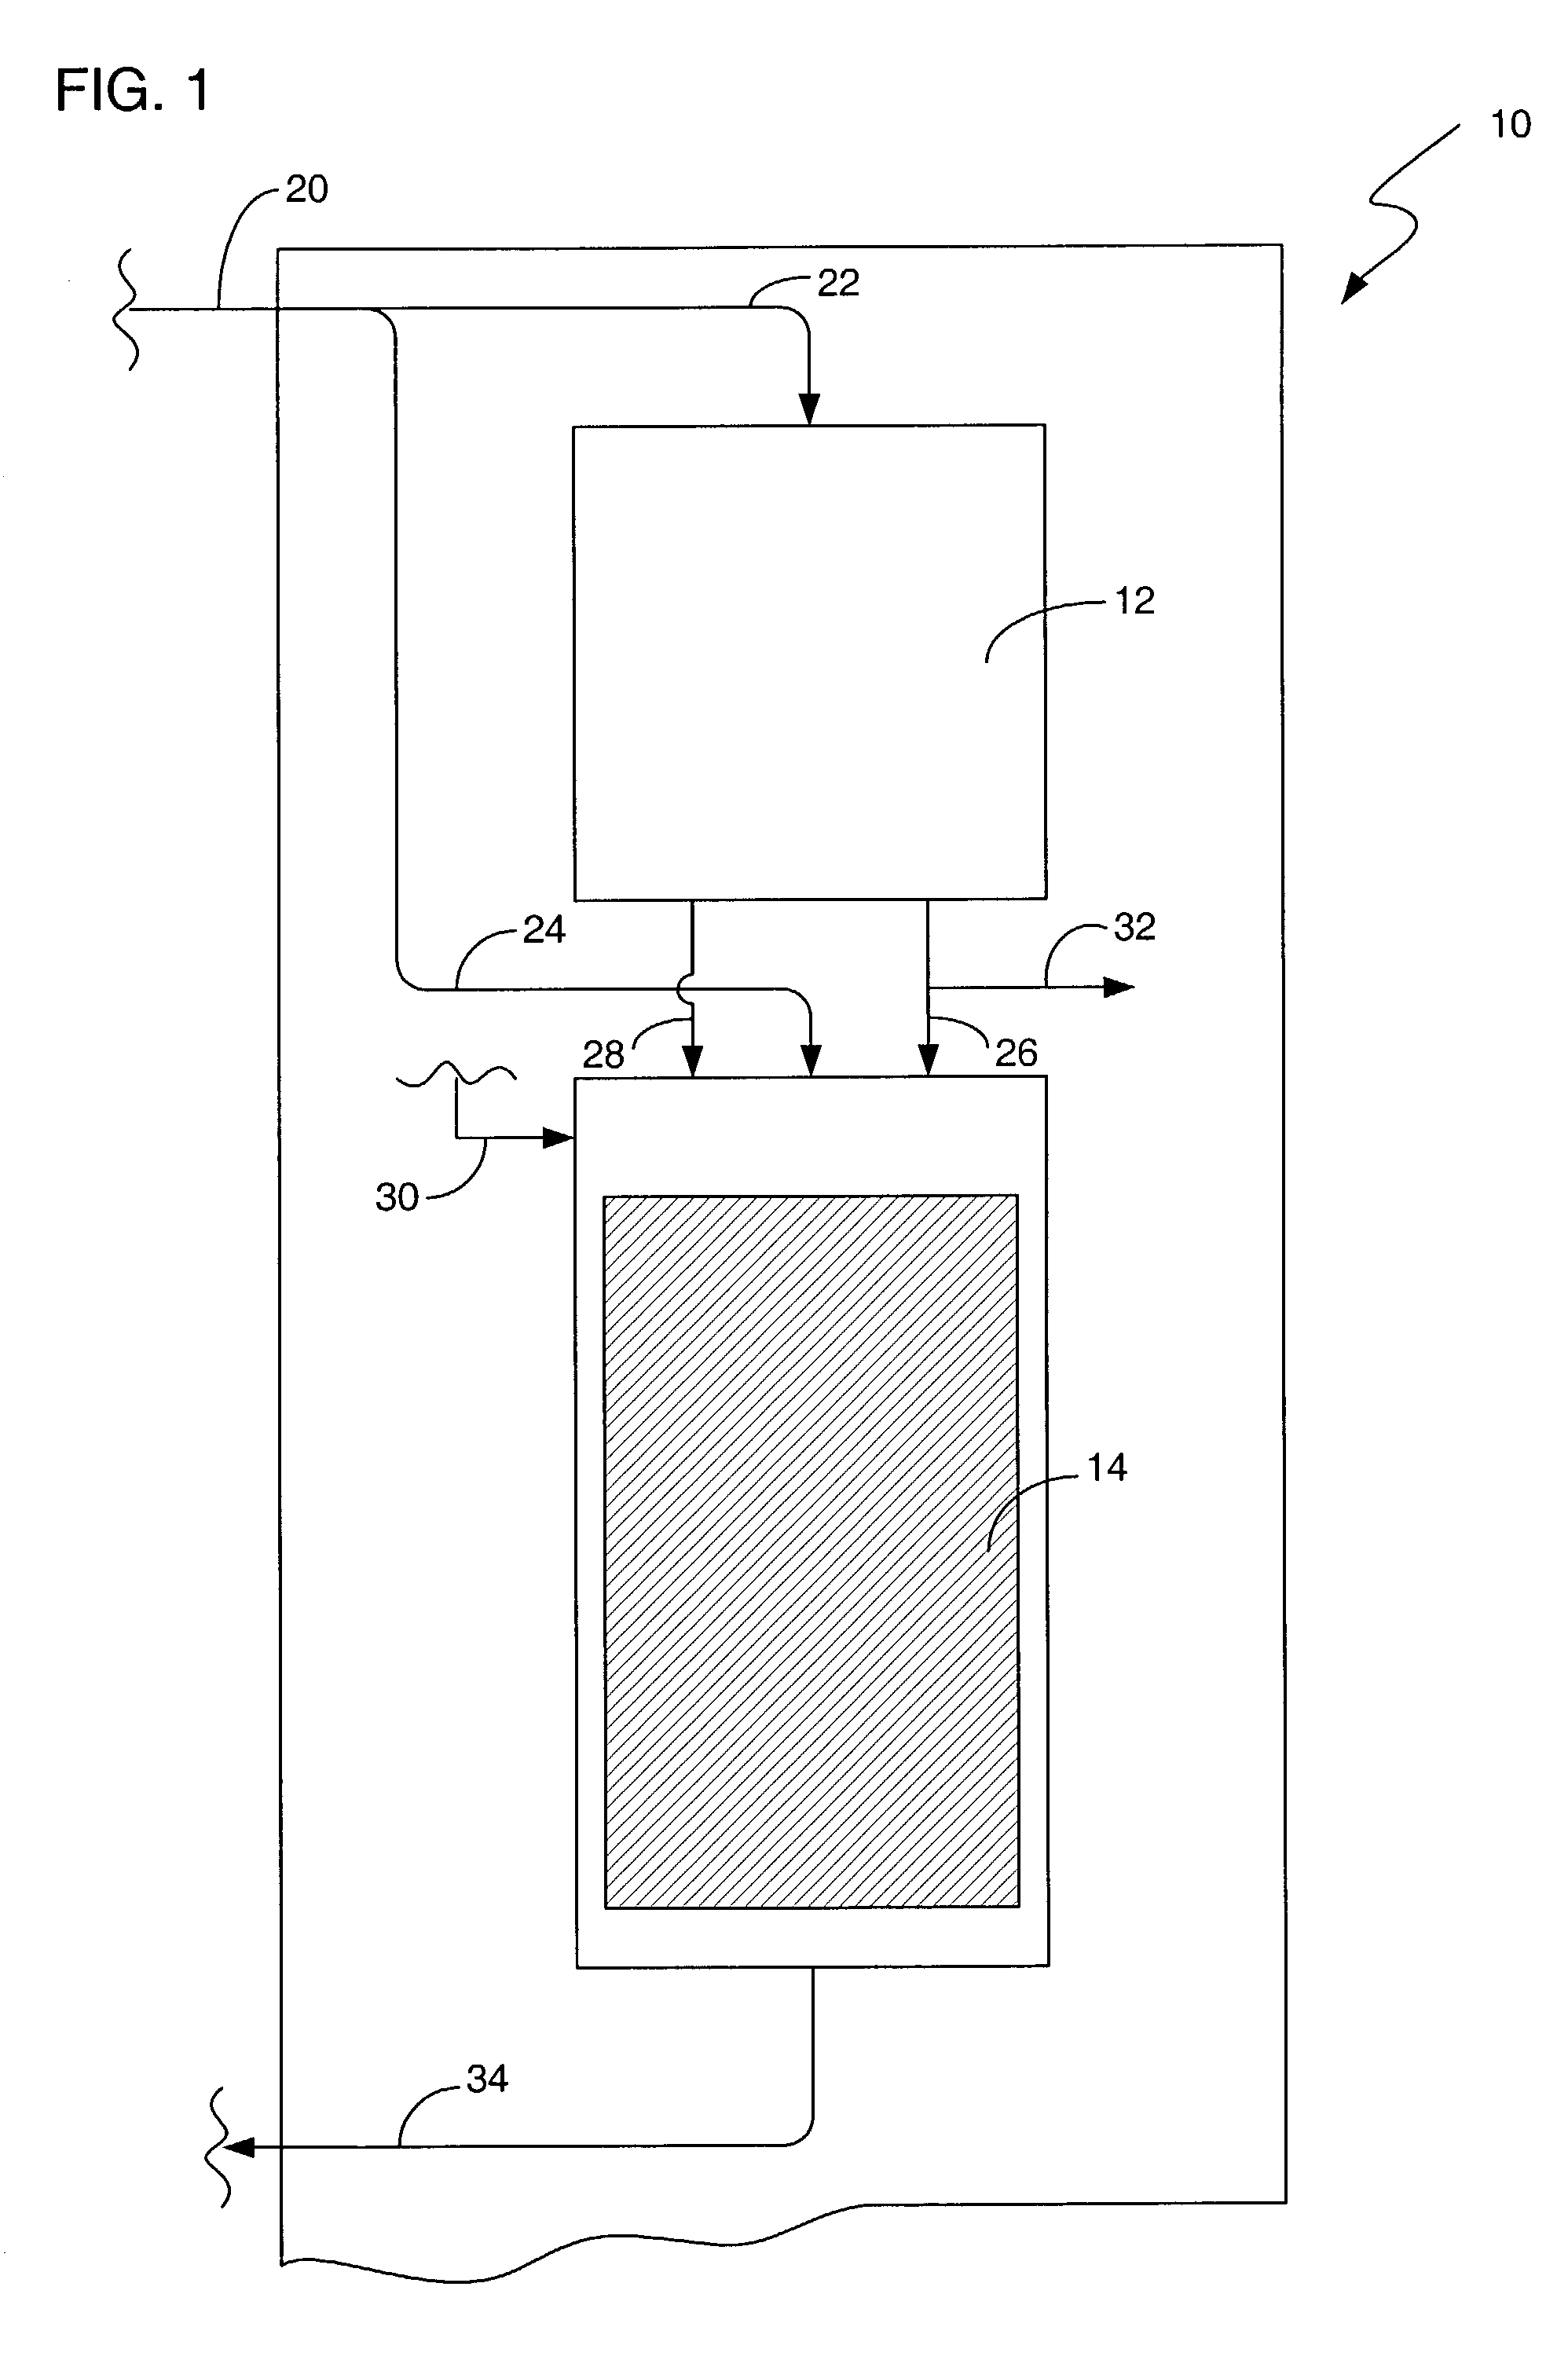 Apparatus and process for the synthesis of hydrogen peroxide directly from hydrogen and oxygen